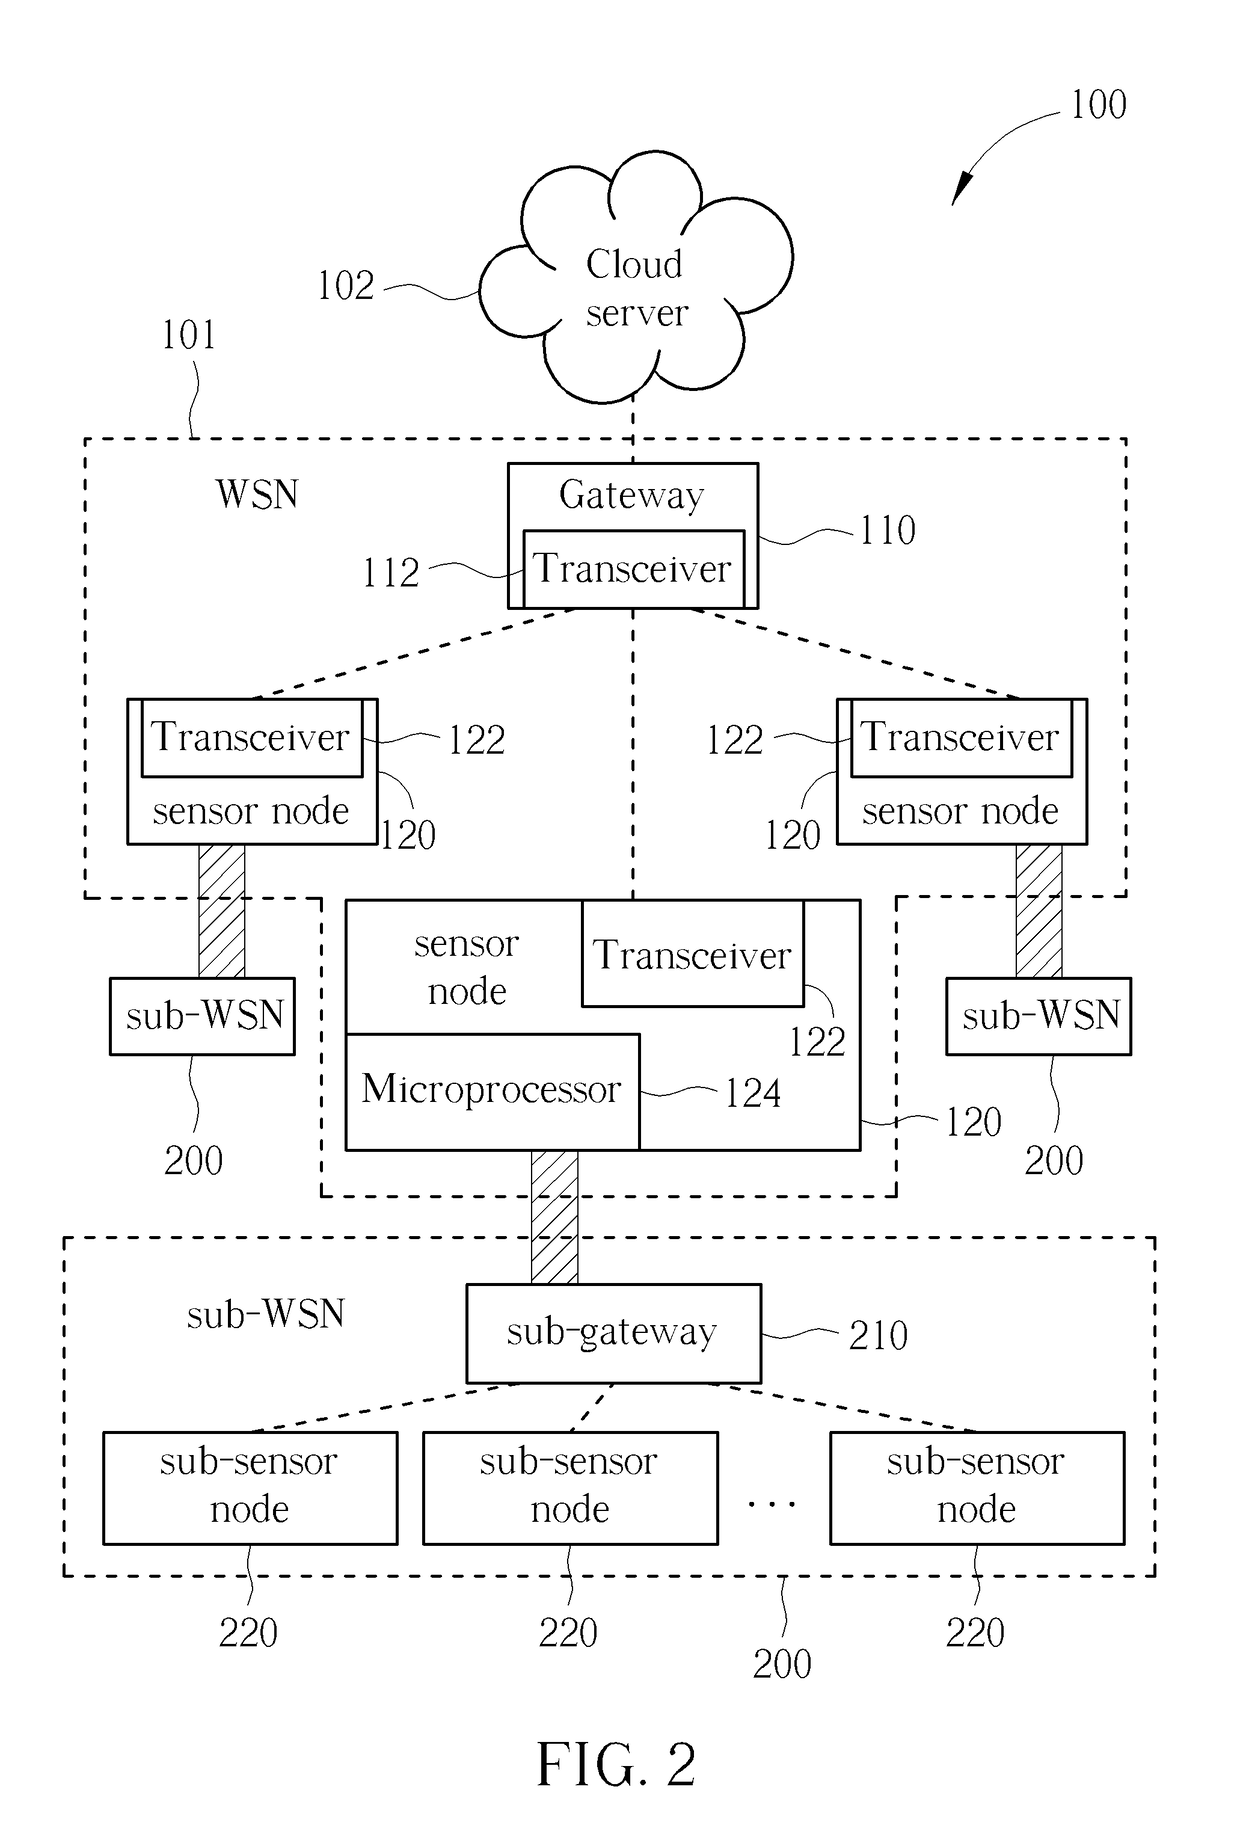 Ultra low power sub-wireless sensor network (sub-wsn) for internet of things (IOT) system